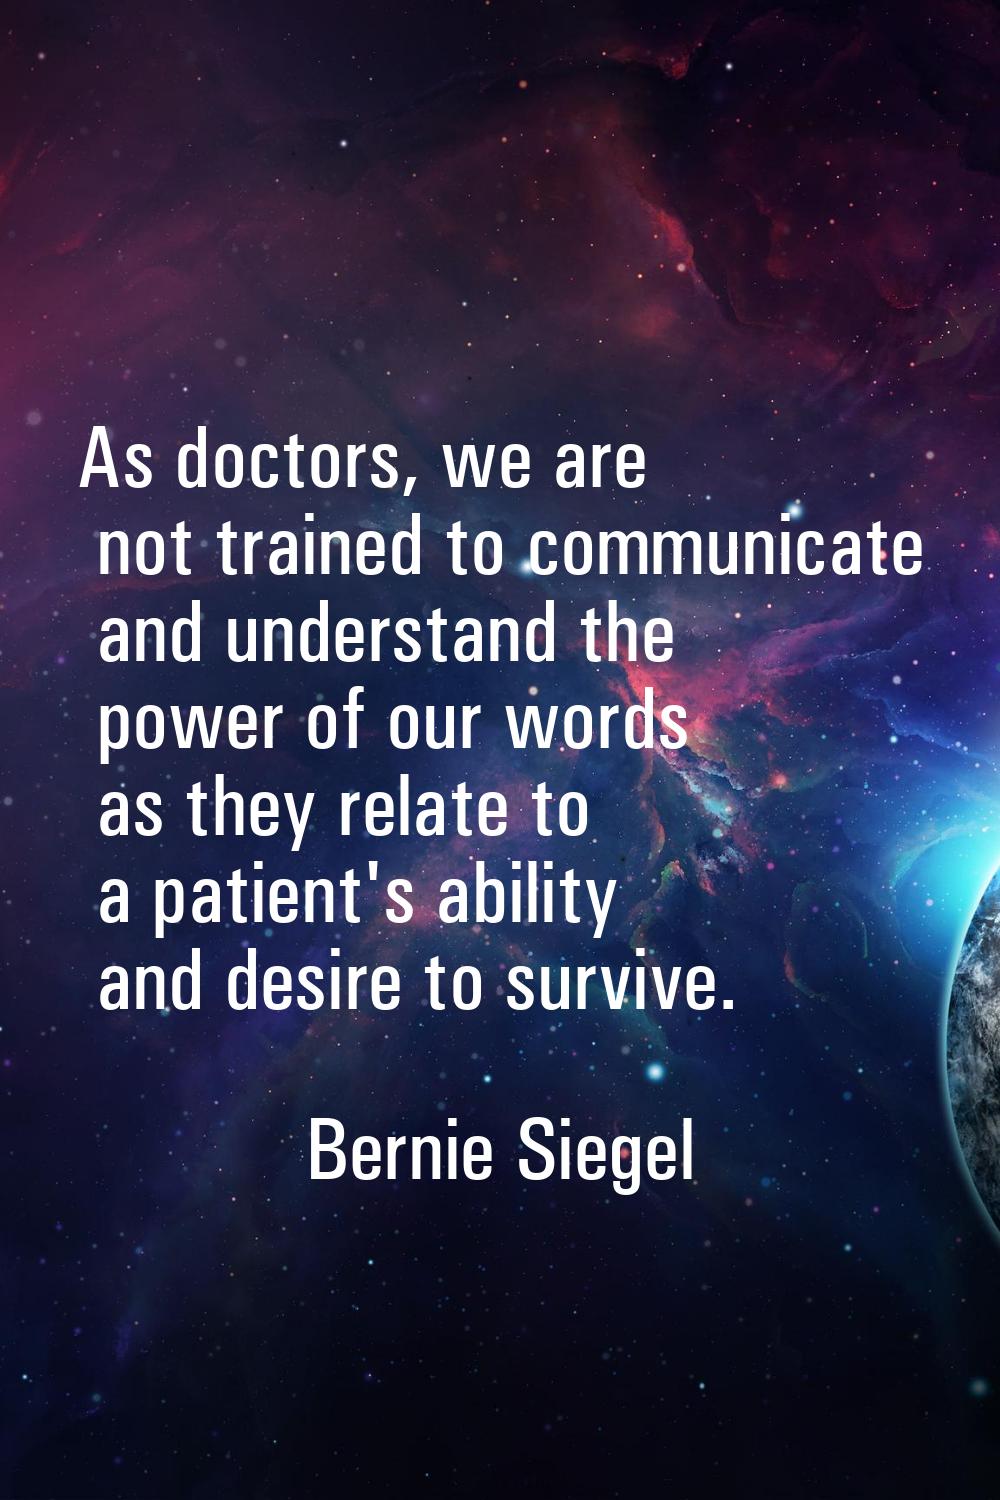 As doctors, we are not trained to communicate and understand the power of our words as they relate 